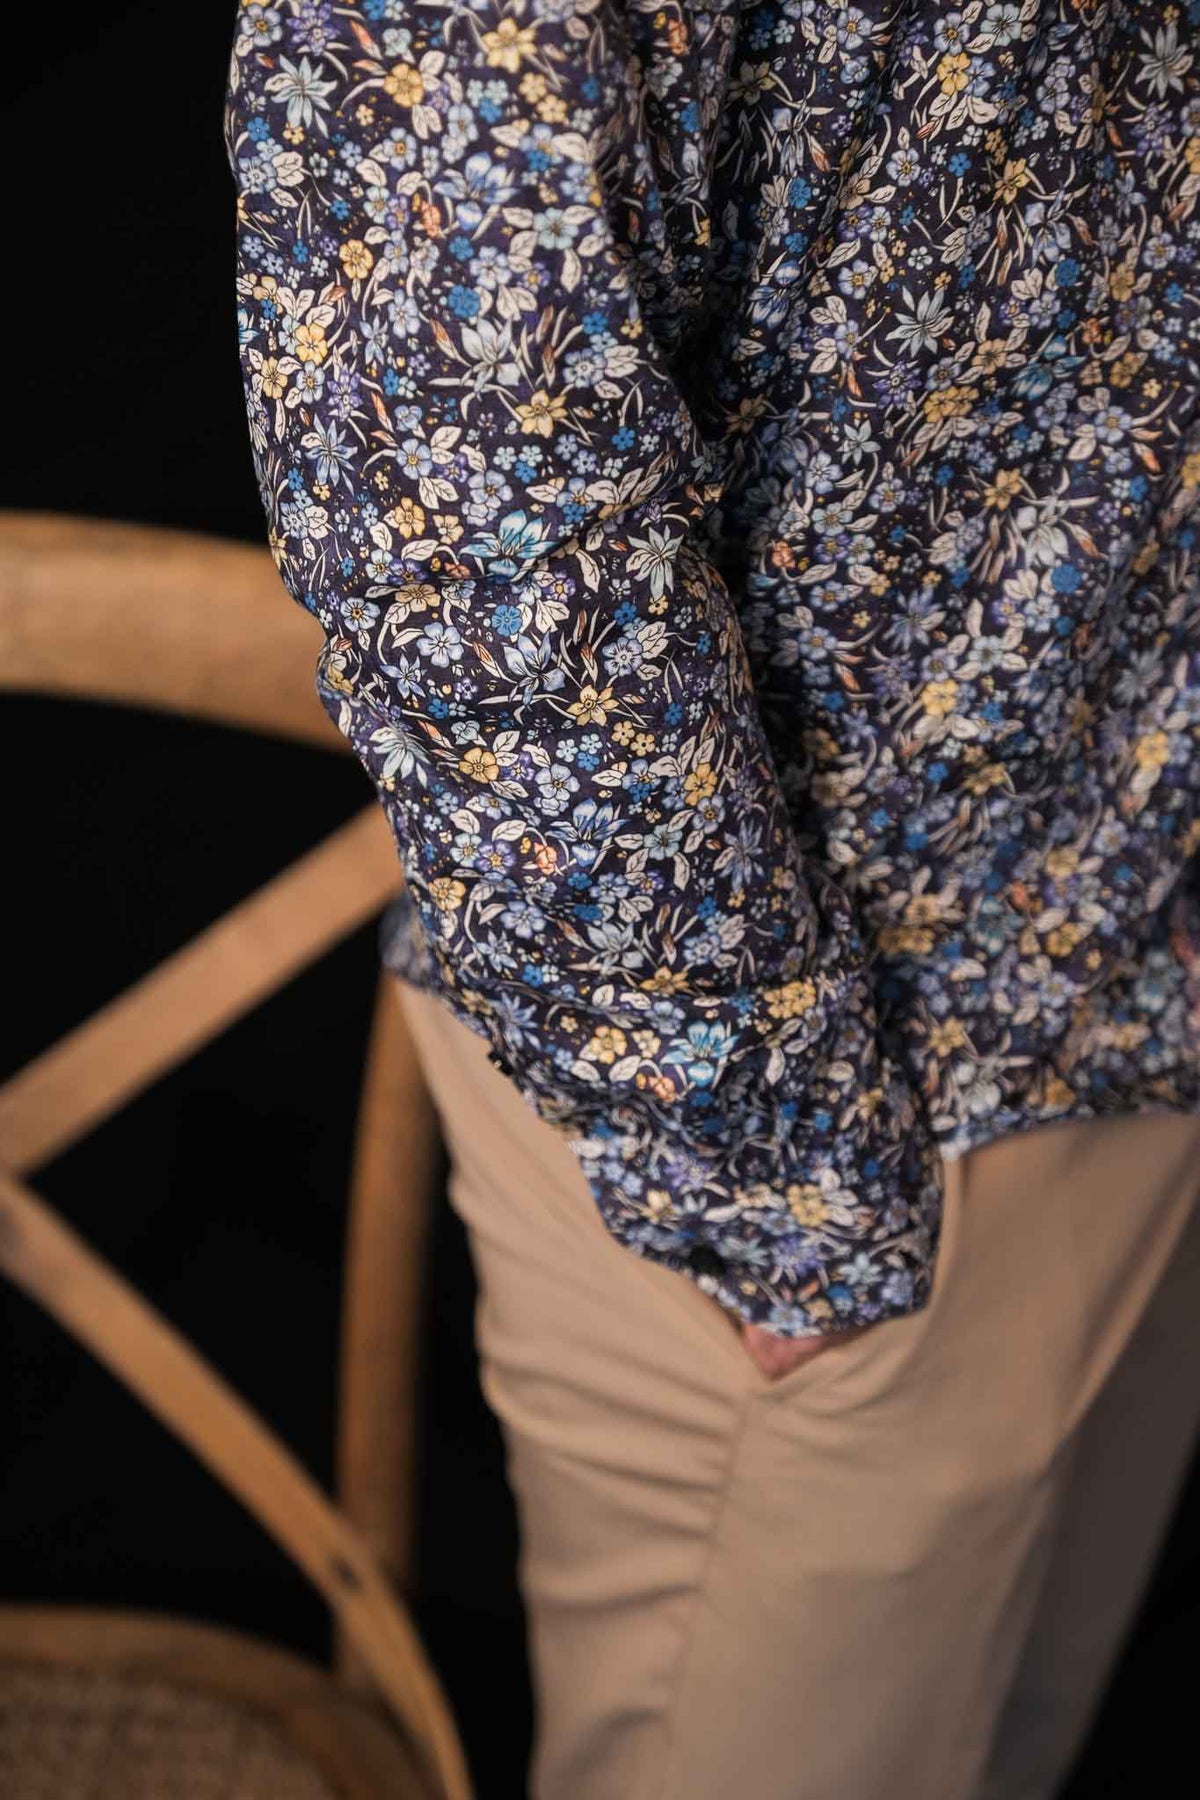 Casual shirt with floral pattern in navy (Art. 2211-C)